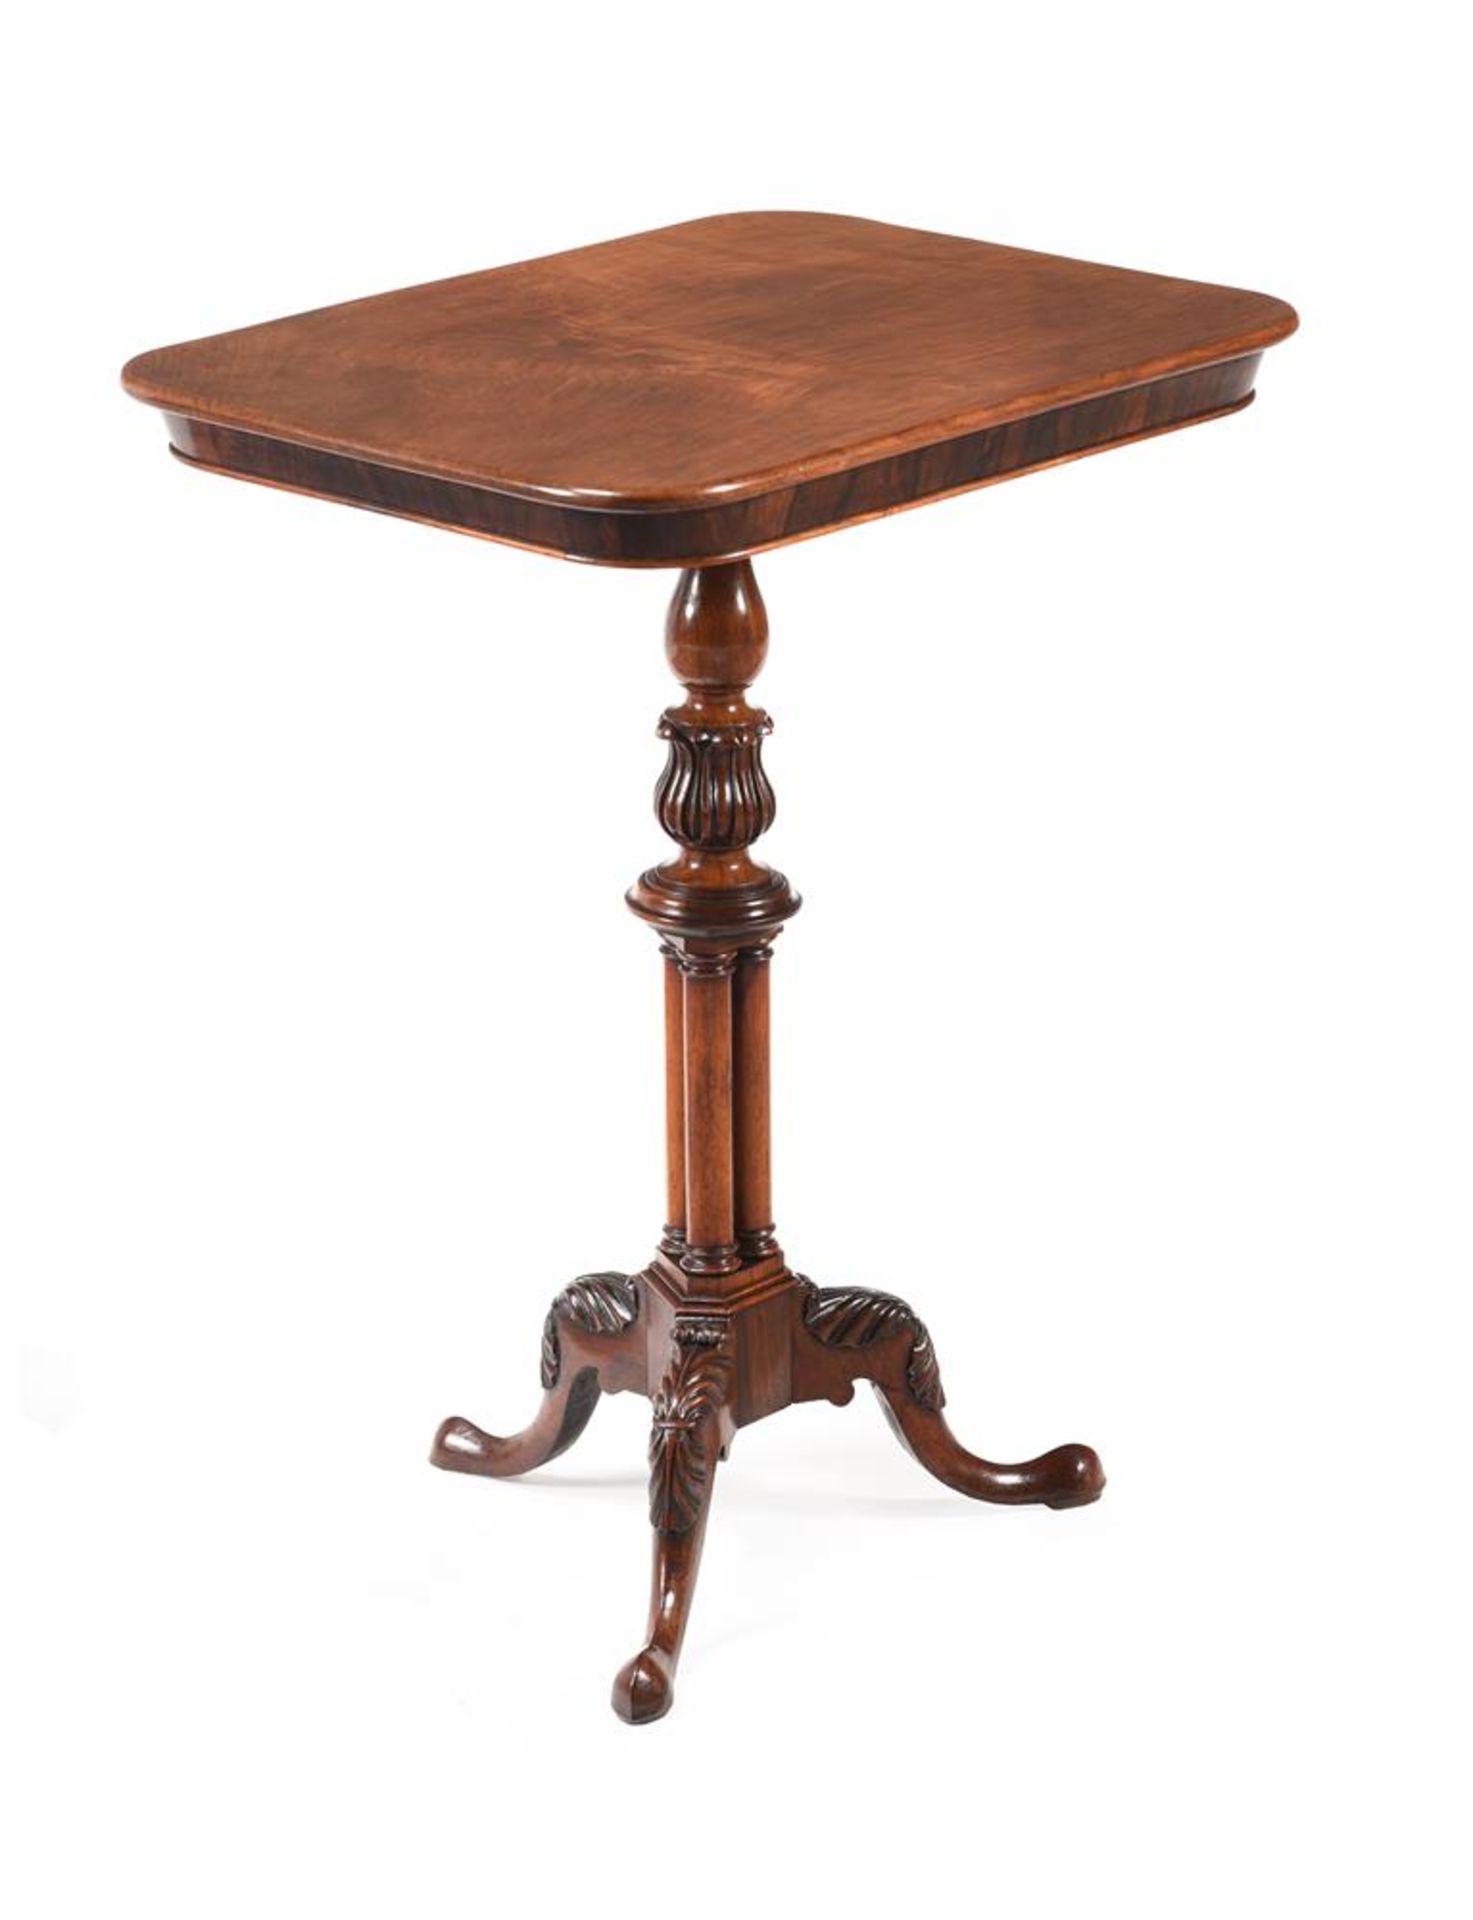 Y A WILLIAM IV ROSEWOOD AND WALNUT TRIPOD TABLE, IN THE MANNER OF GILLOWS, CIRCA 1830